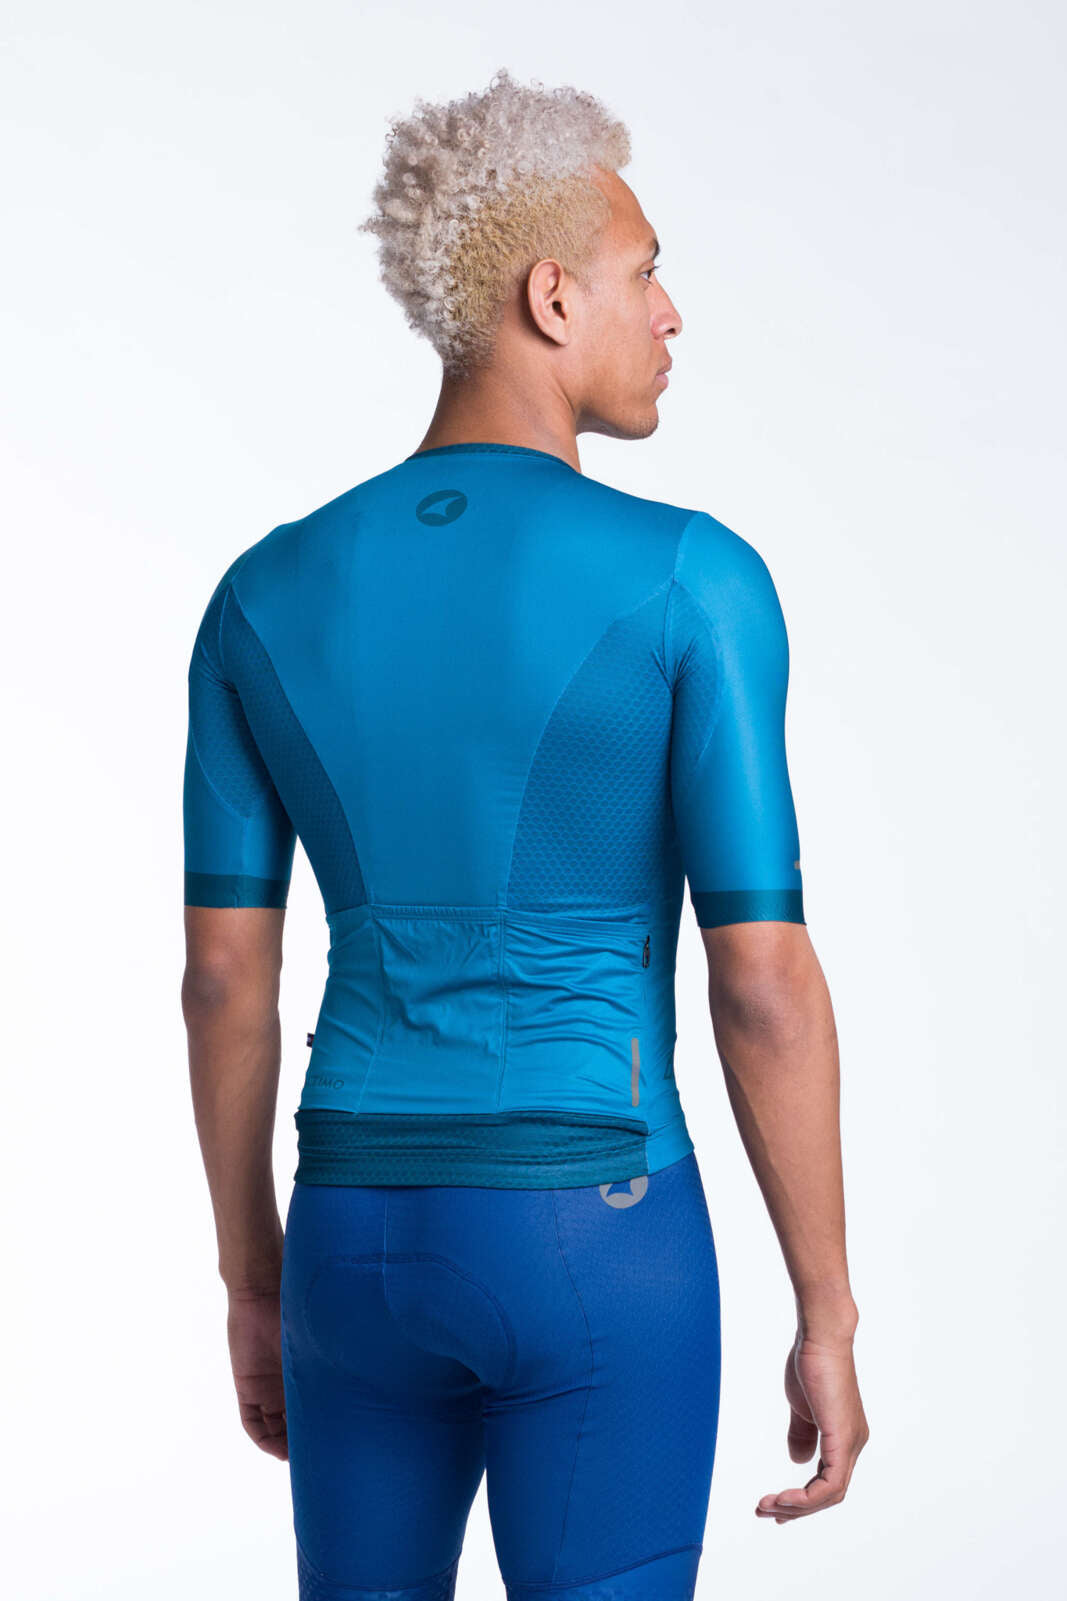 Men's Teal Aero Cycling Jersey - Summit Back View